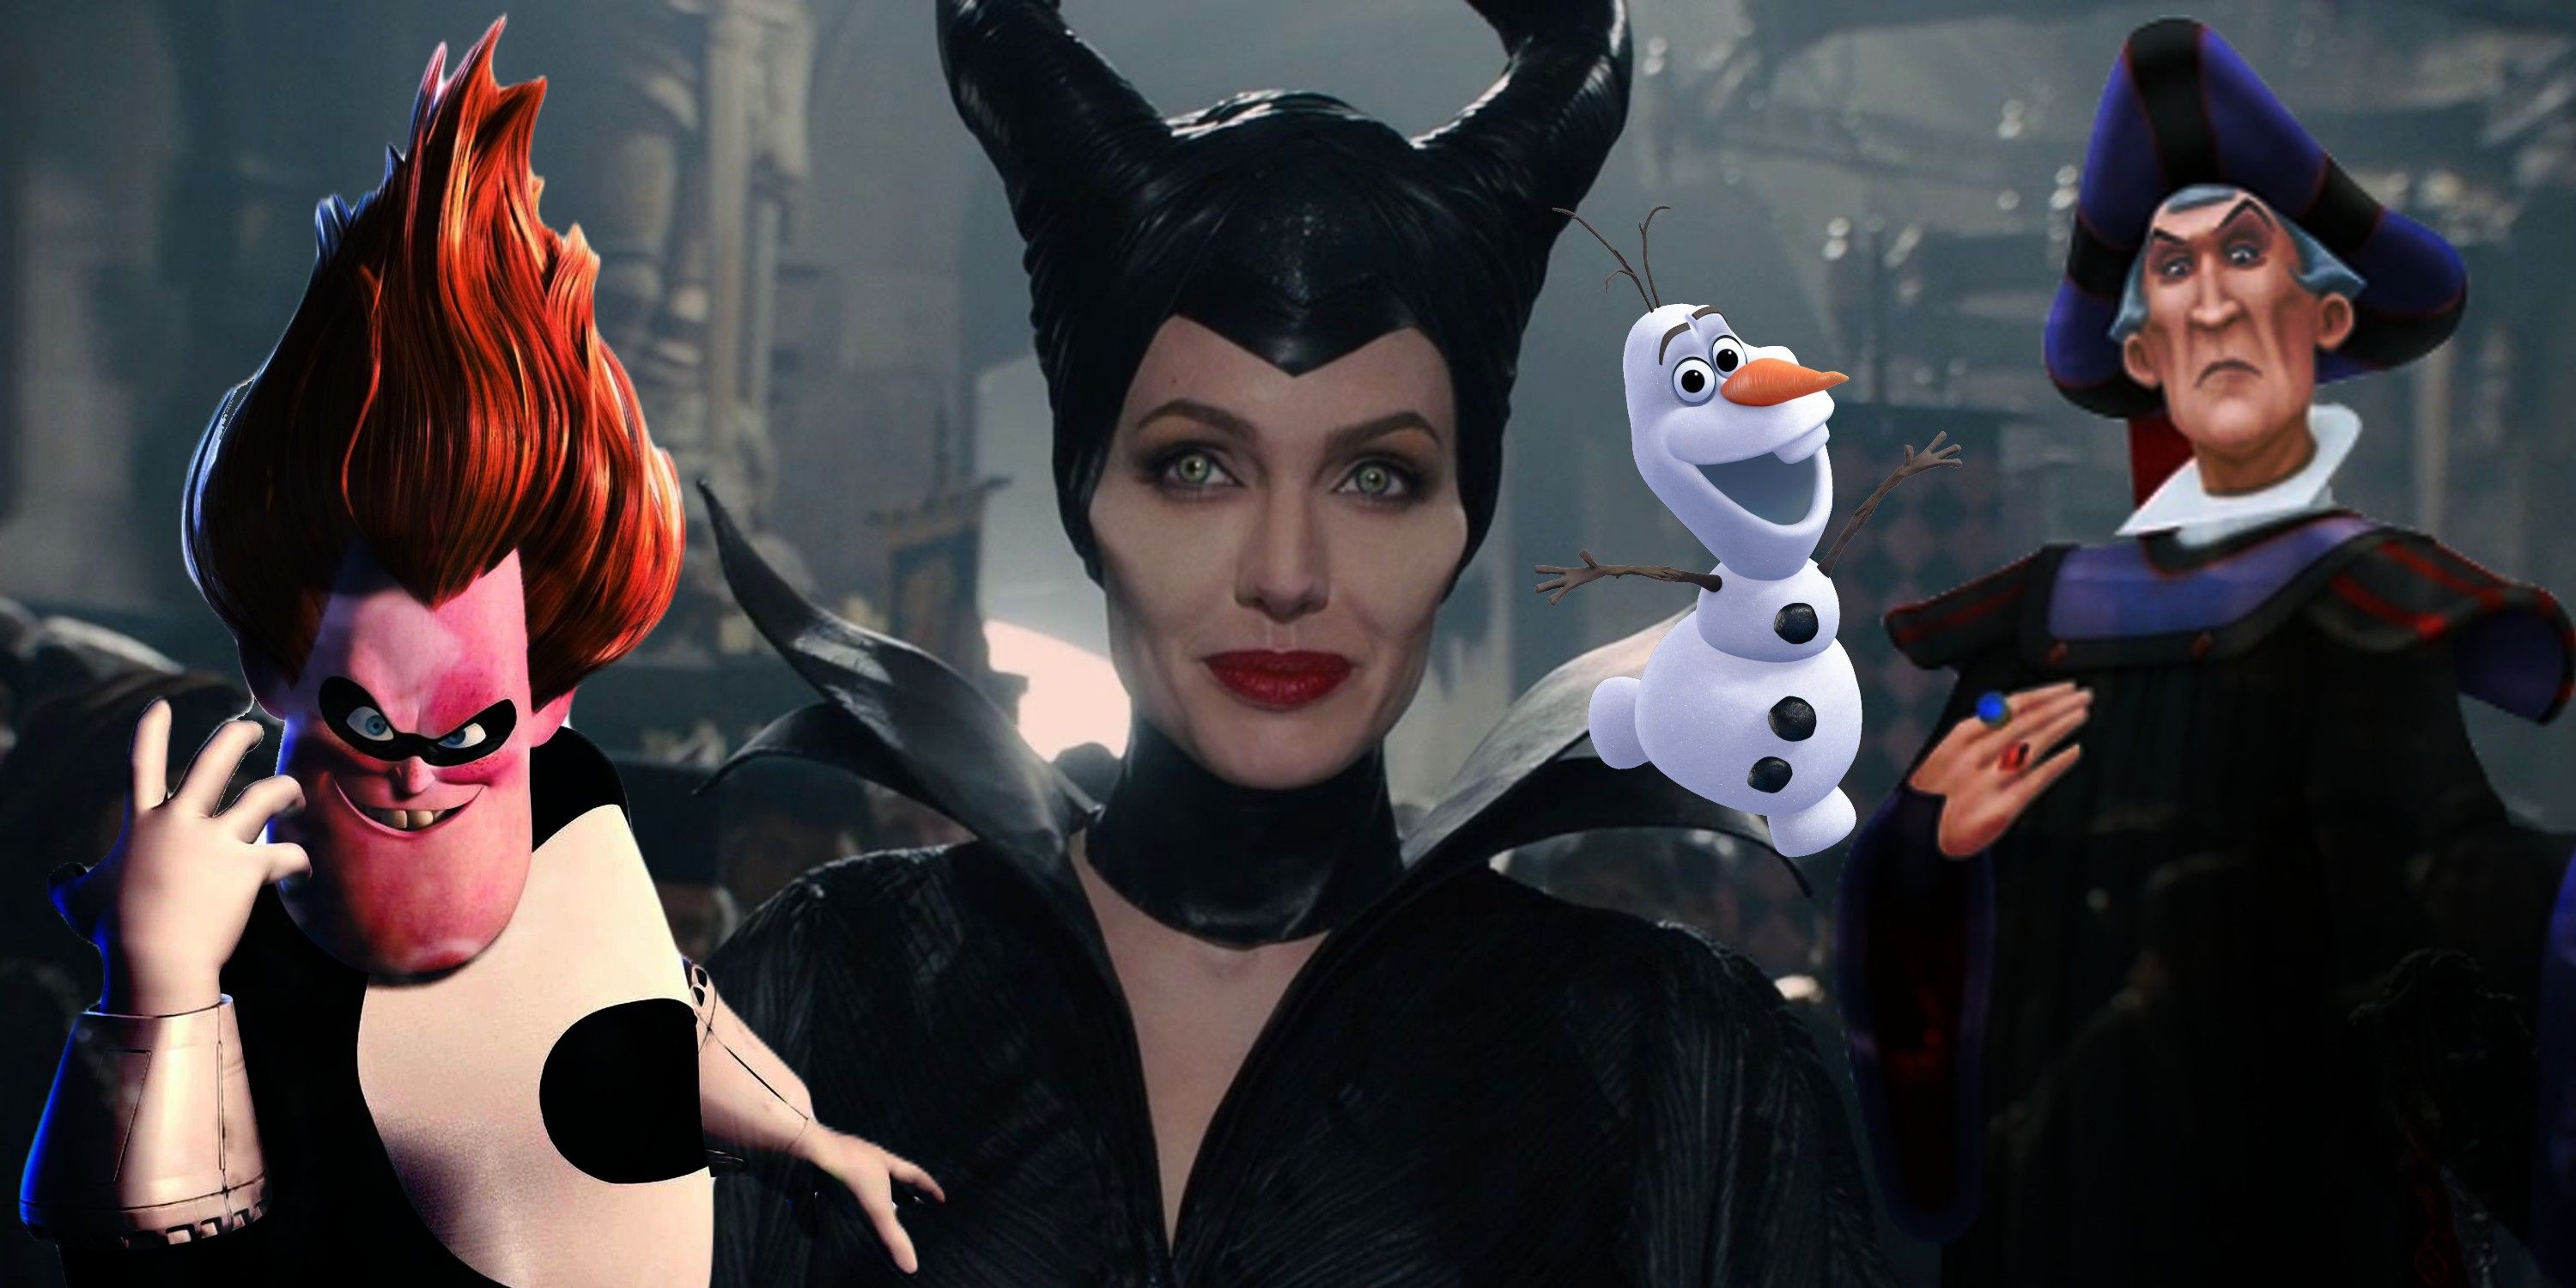 Image of Syndrome (The Incredibles), Maleficent, Olaf (Frozen) and Frollo (Hunchback of Notre Dame)